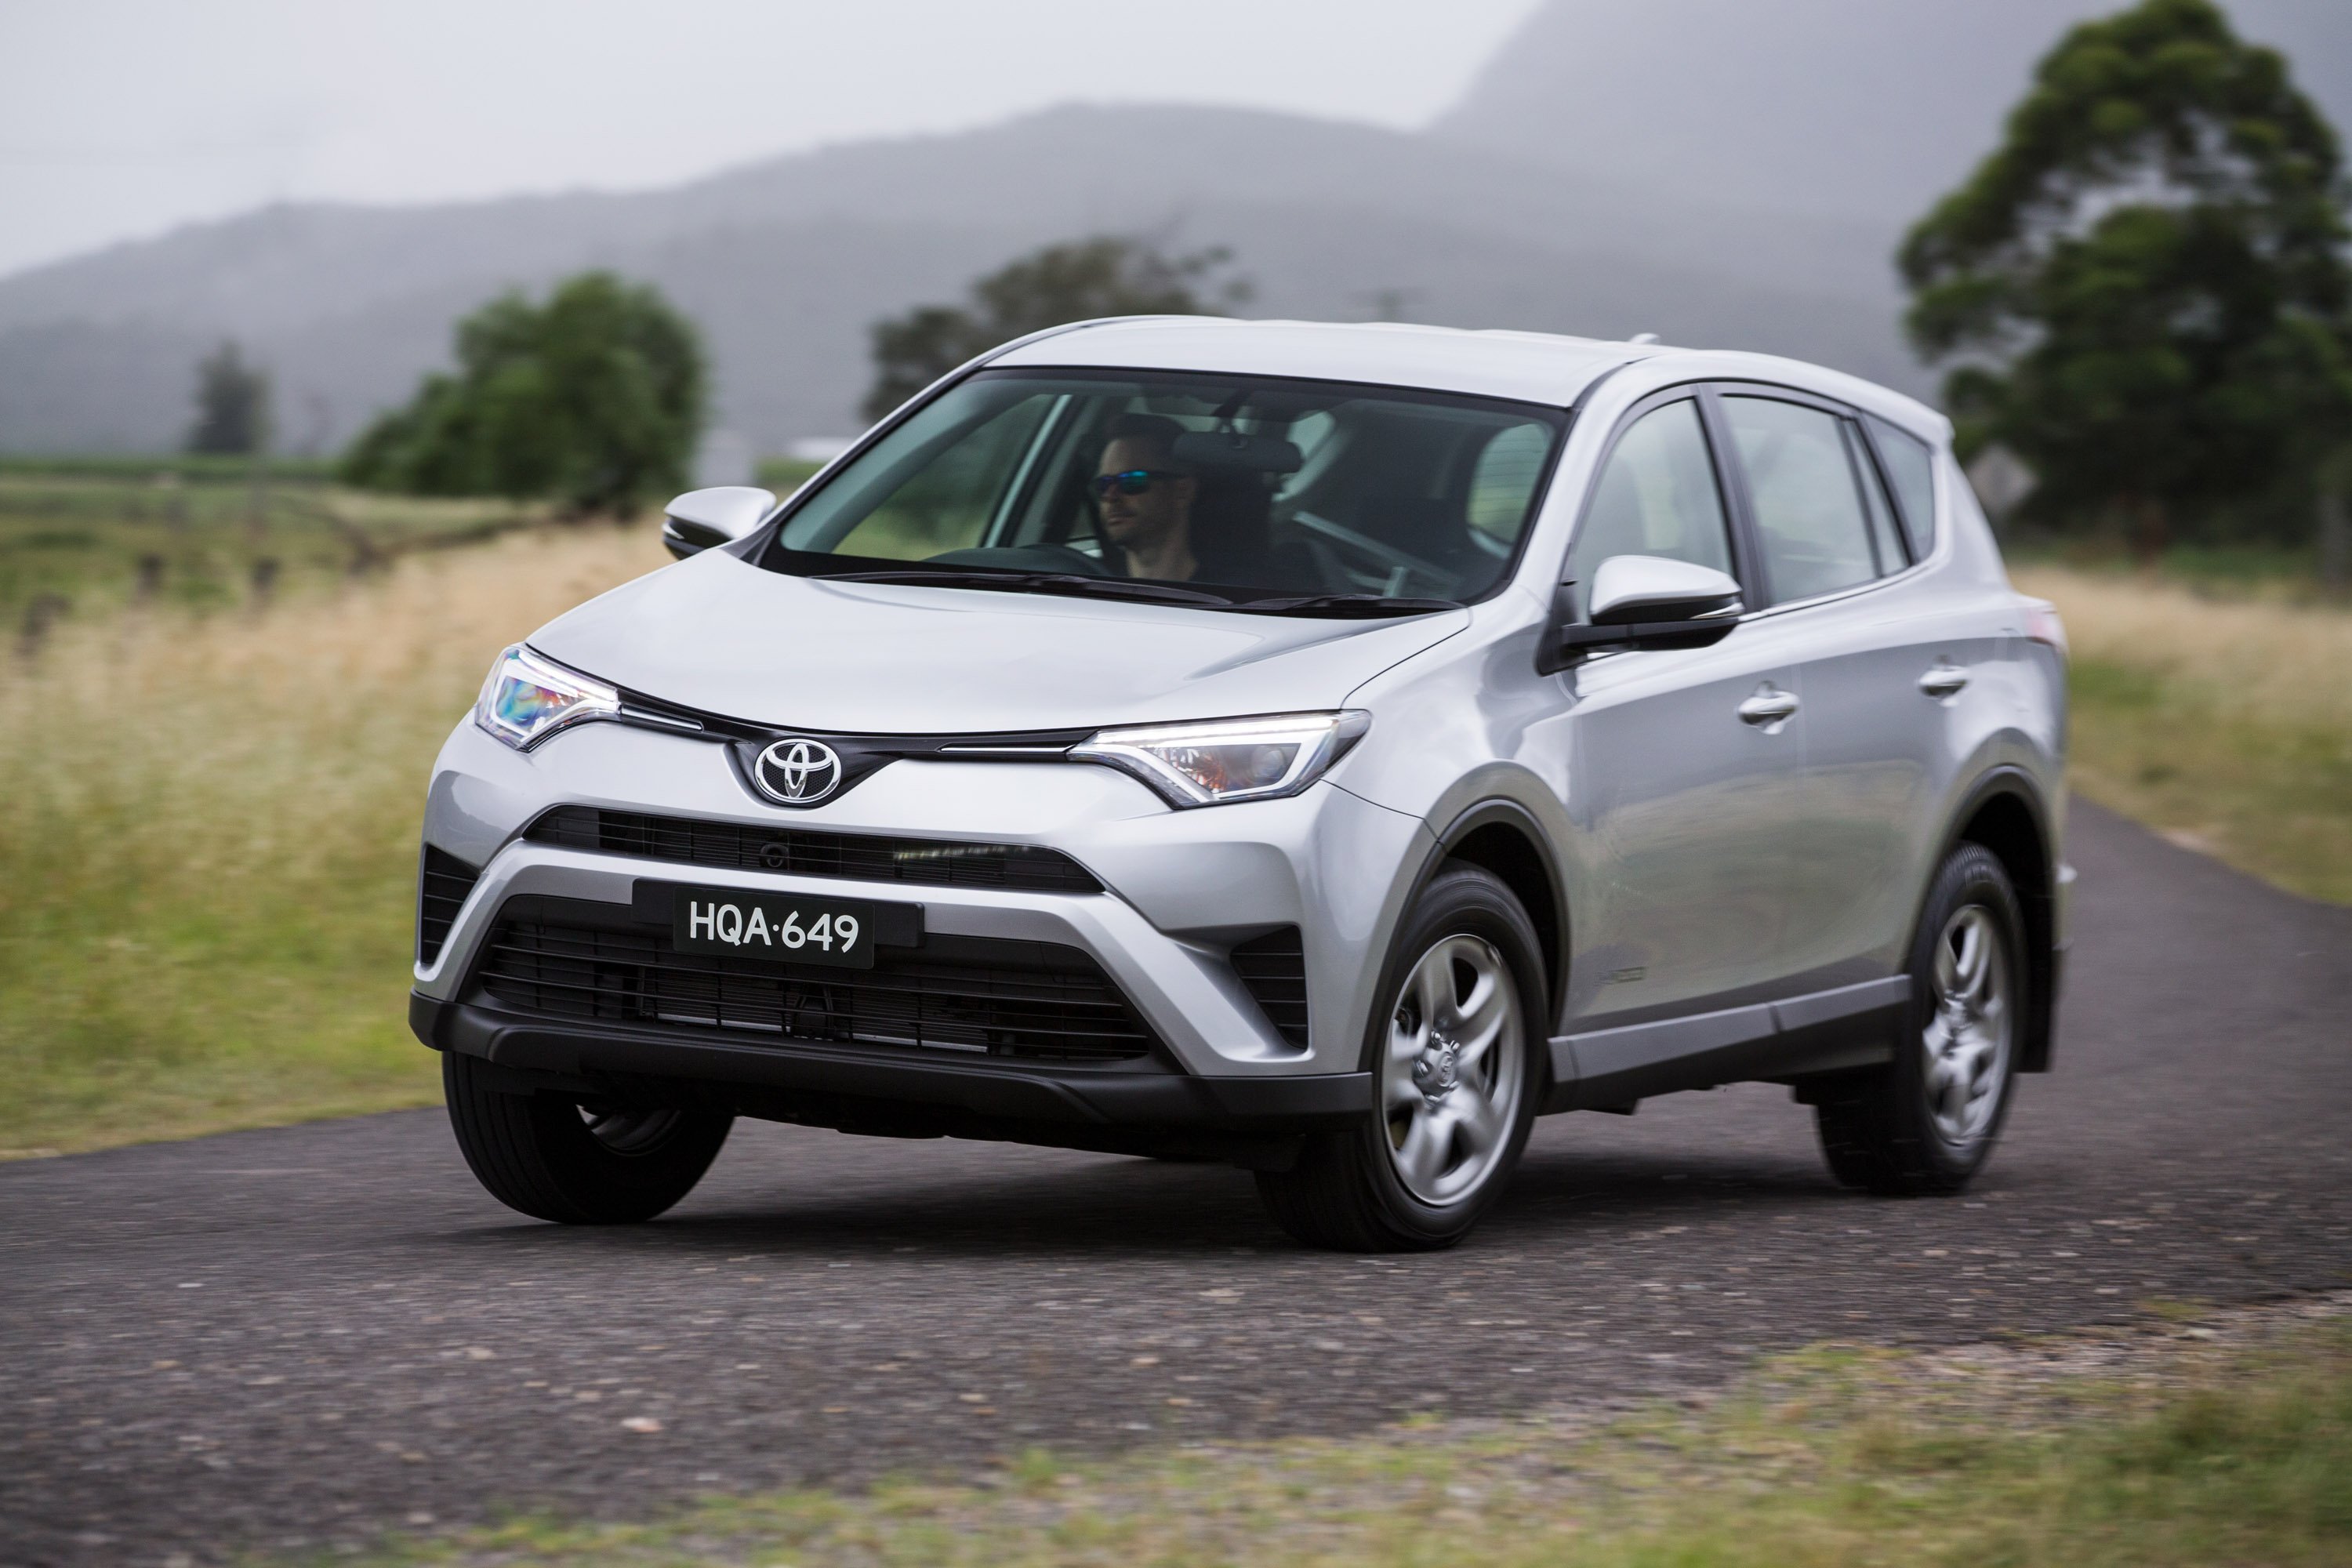 2016 Toyota RAV4 pricing and specifications Photos (1 of 14)